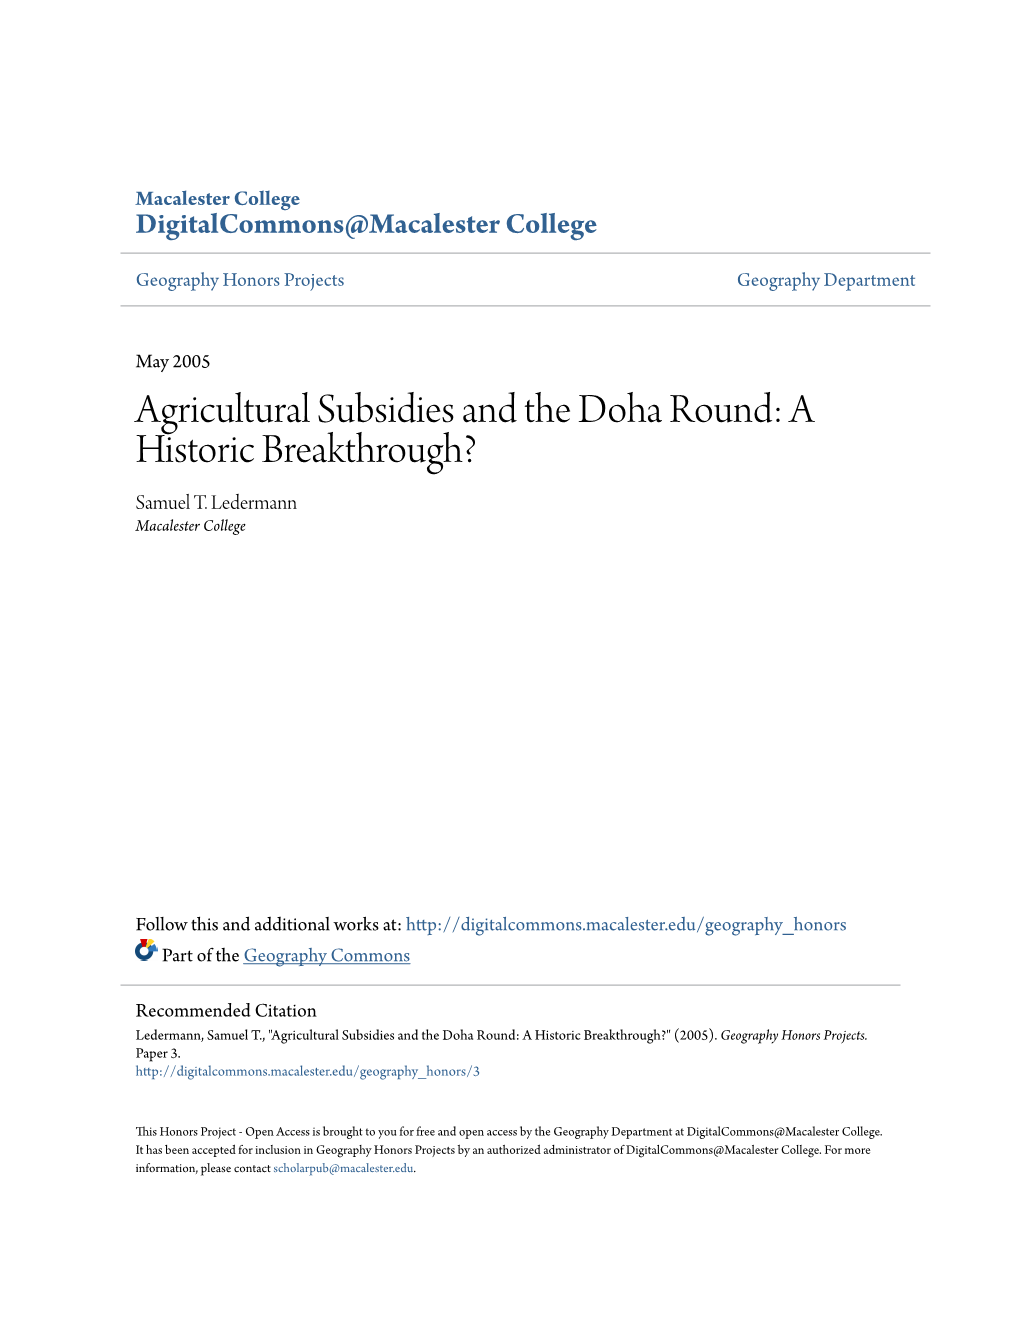 Agricultural Subsidies and the Doha Round: a Historic Breakthrough? Samuel T